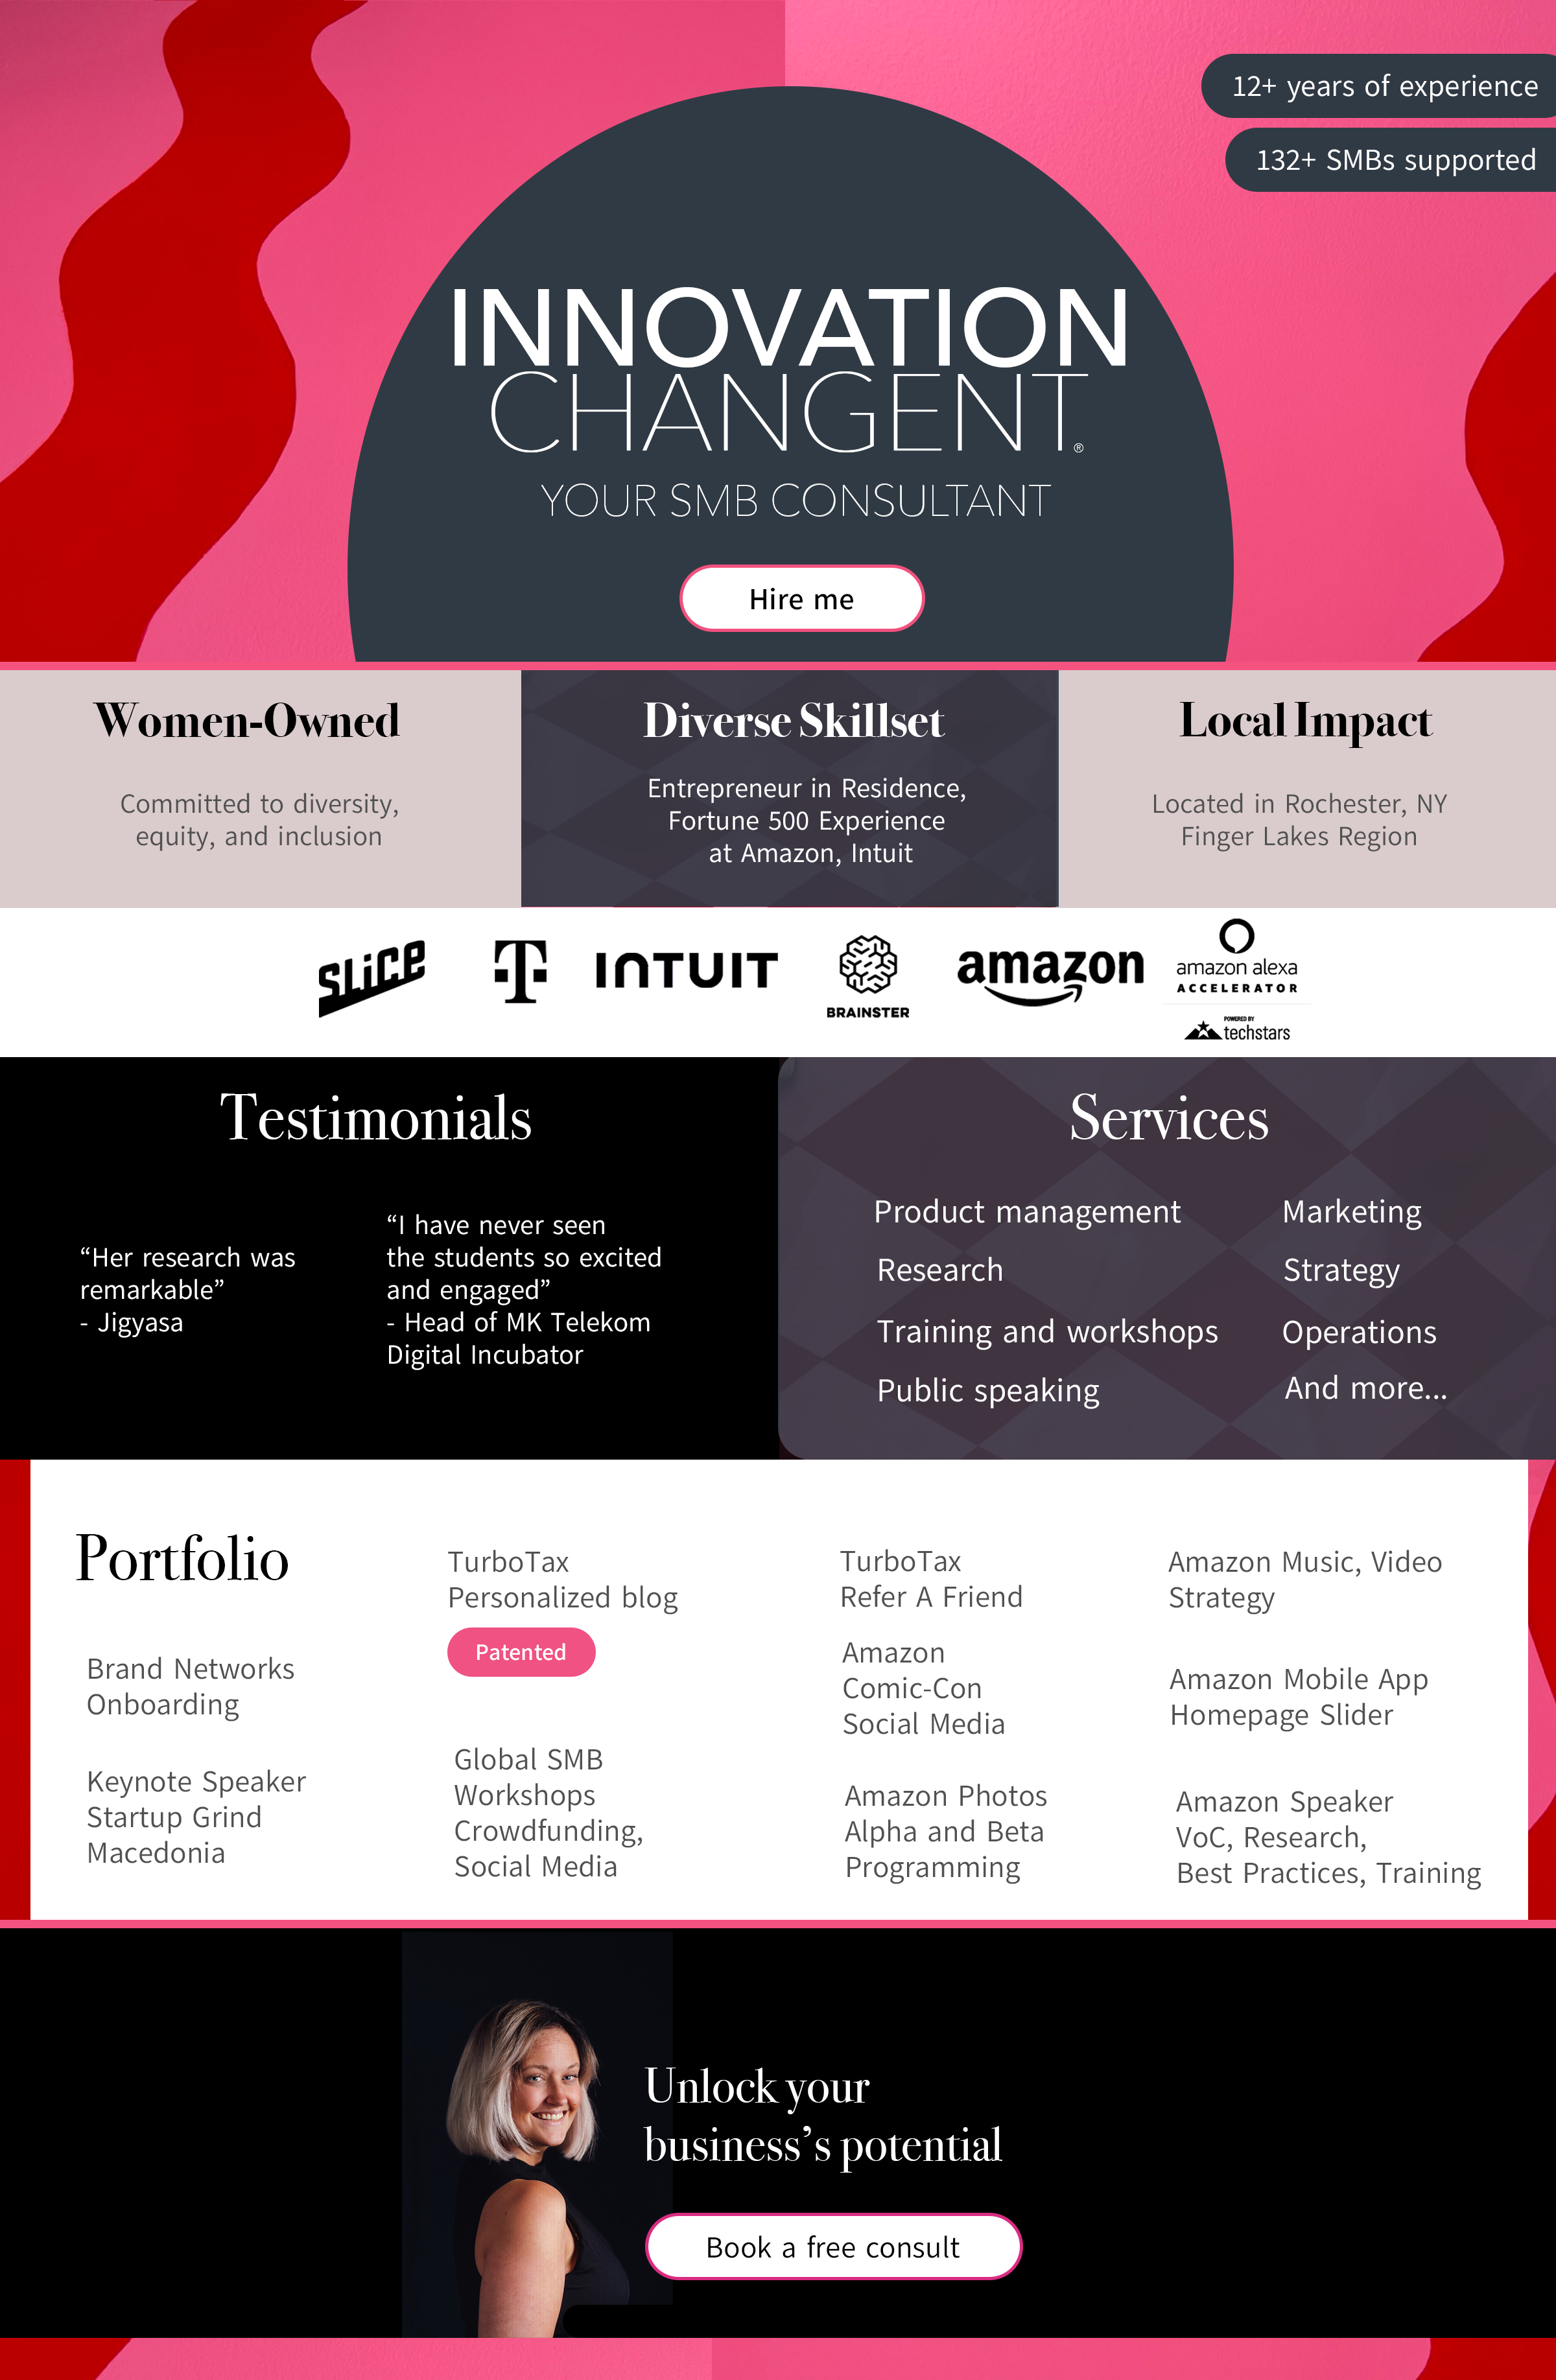 Innovation Changent, your SMB consultant. Hire me! Diverse skillset, women-owned, with a local impact. Offering services including program management, project management, marketing, strategy, research, and product management. See more details in my portfolio. Unlock your business's potential. Book a free consult